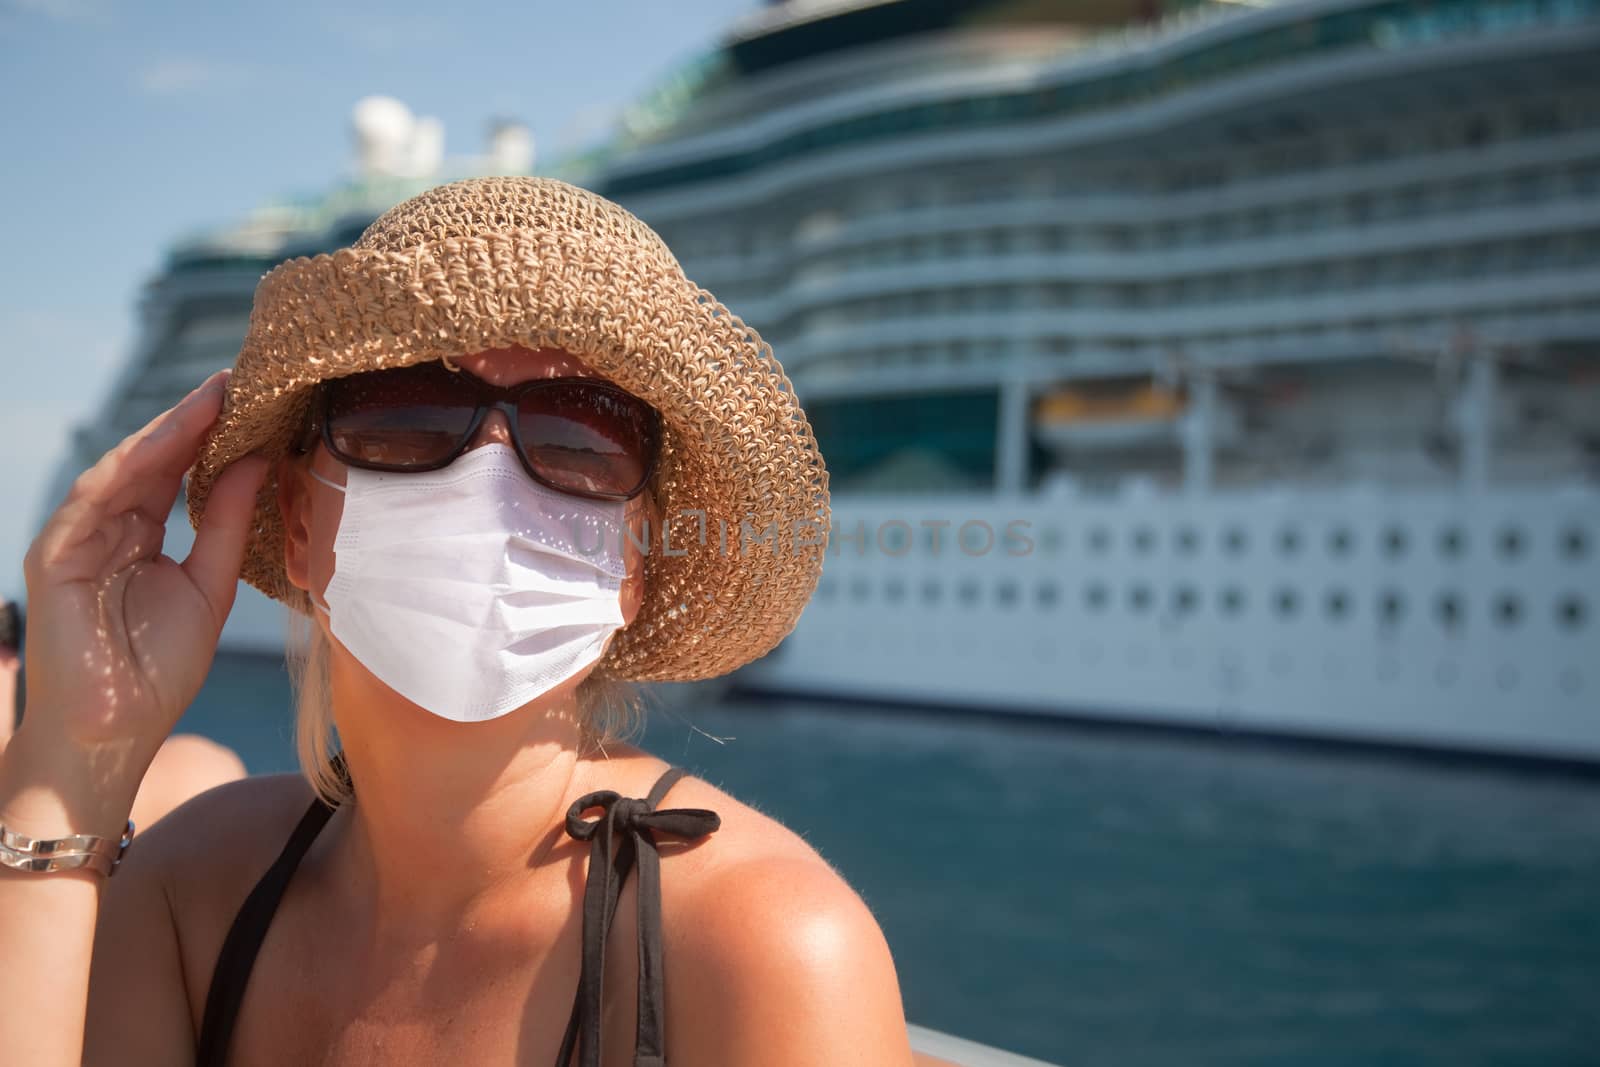 Young Adult Woman Wearing Face Mask on Tender Boat With Passenger Cruise Ship Behind..